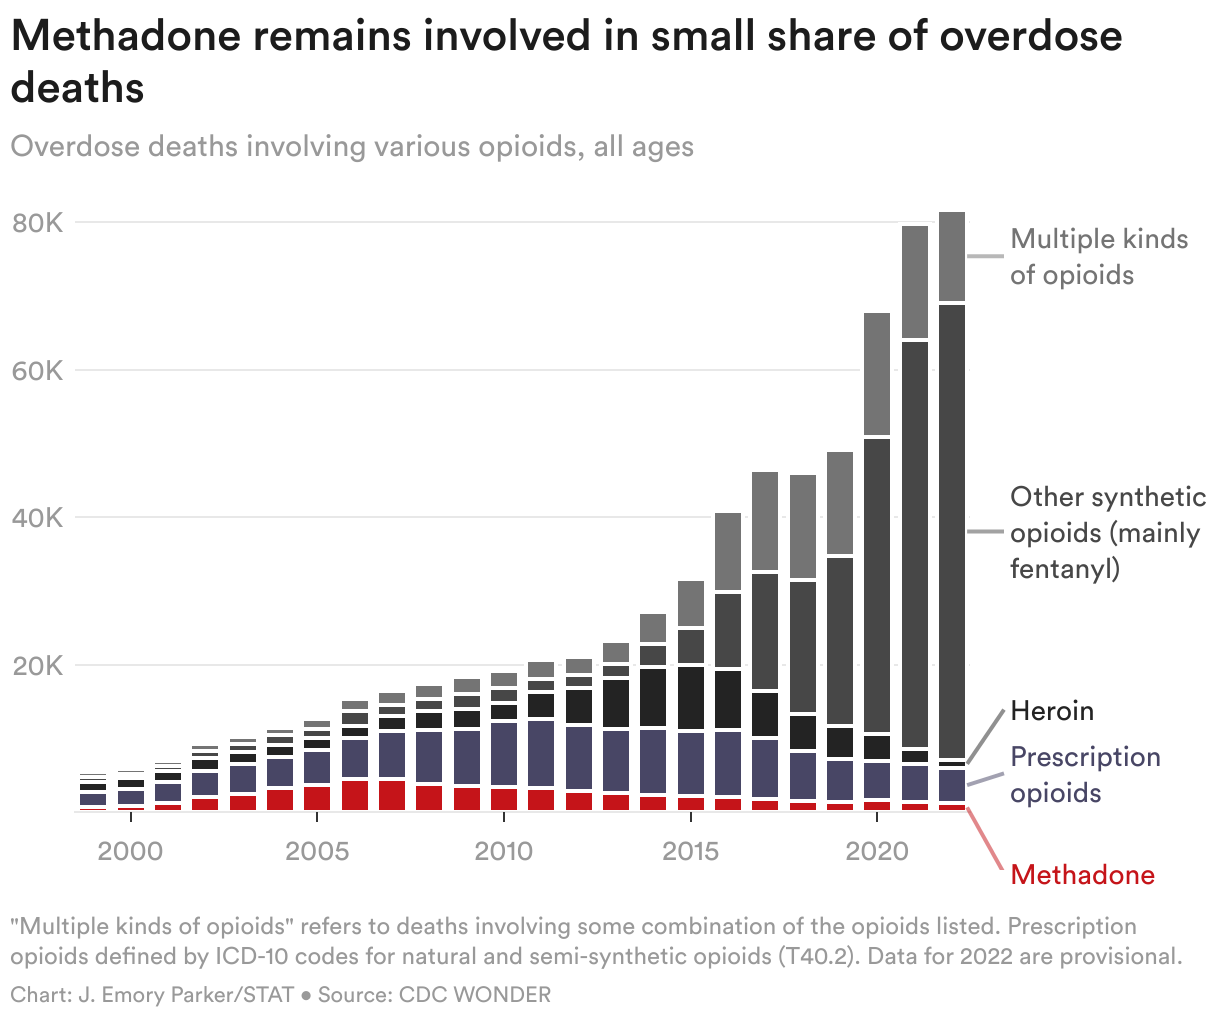 Column chart showing the total number of opioid overdose deaths by year separated by which kind of opioids contributed to the death. It shows that death involving only methadone peaked in 2006 and have declined every year since and makes up a very small proportion of all overdose deaths.